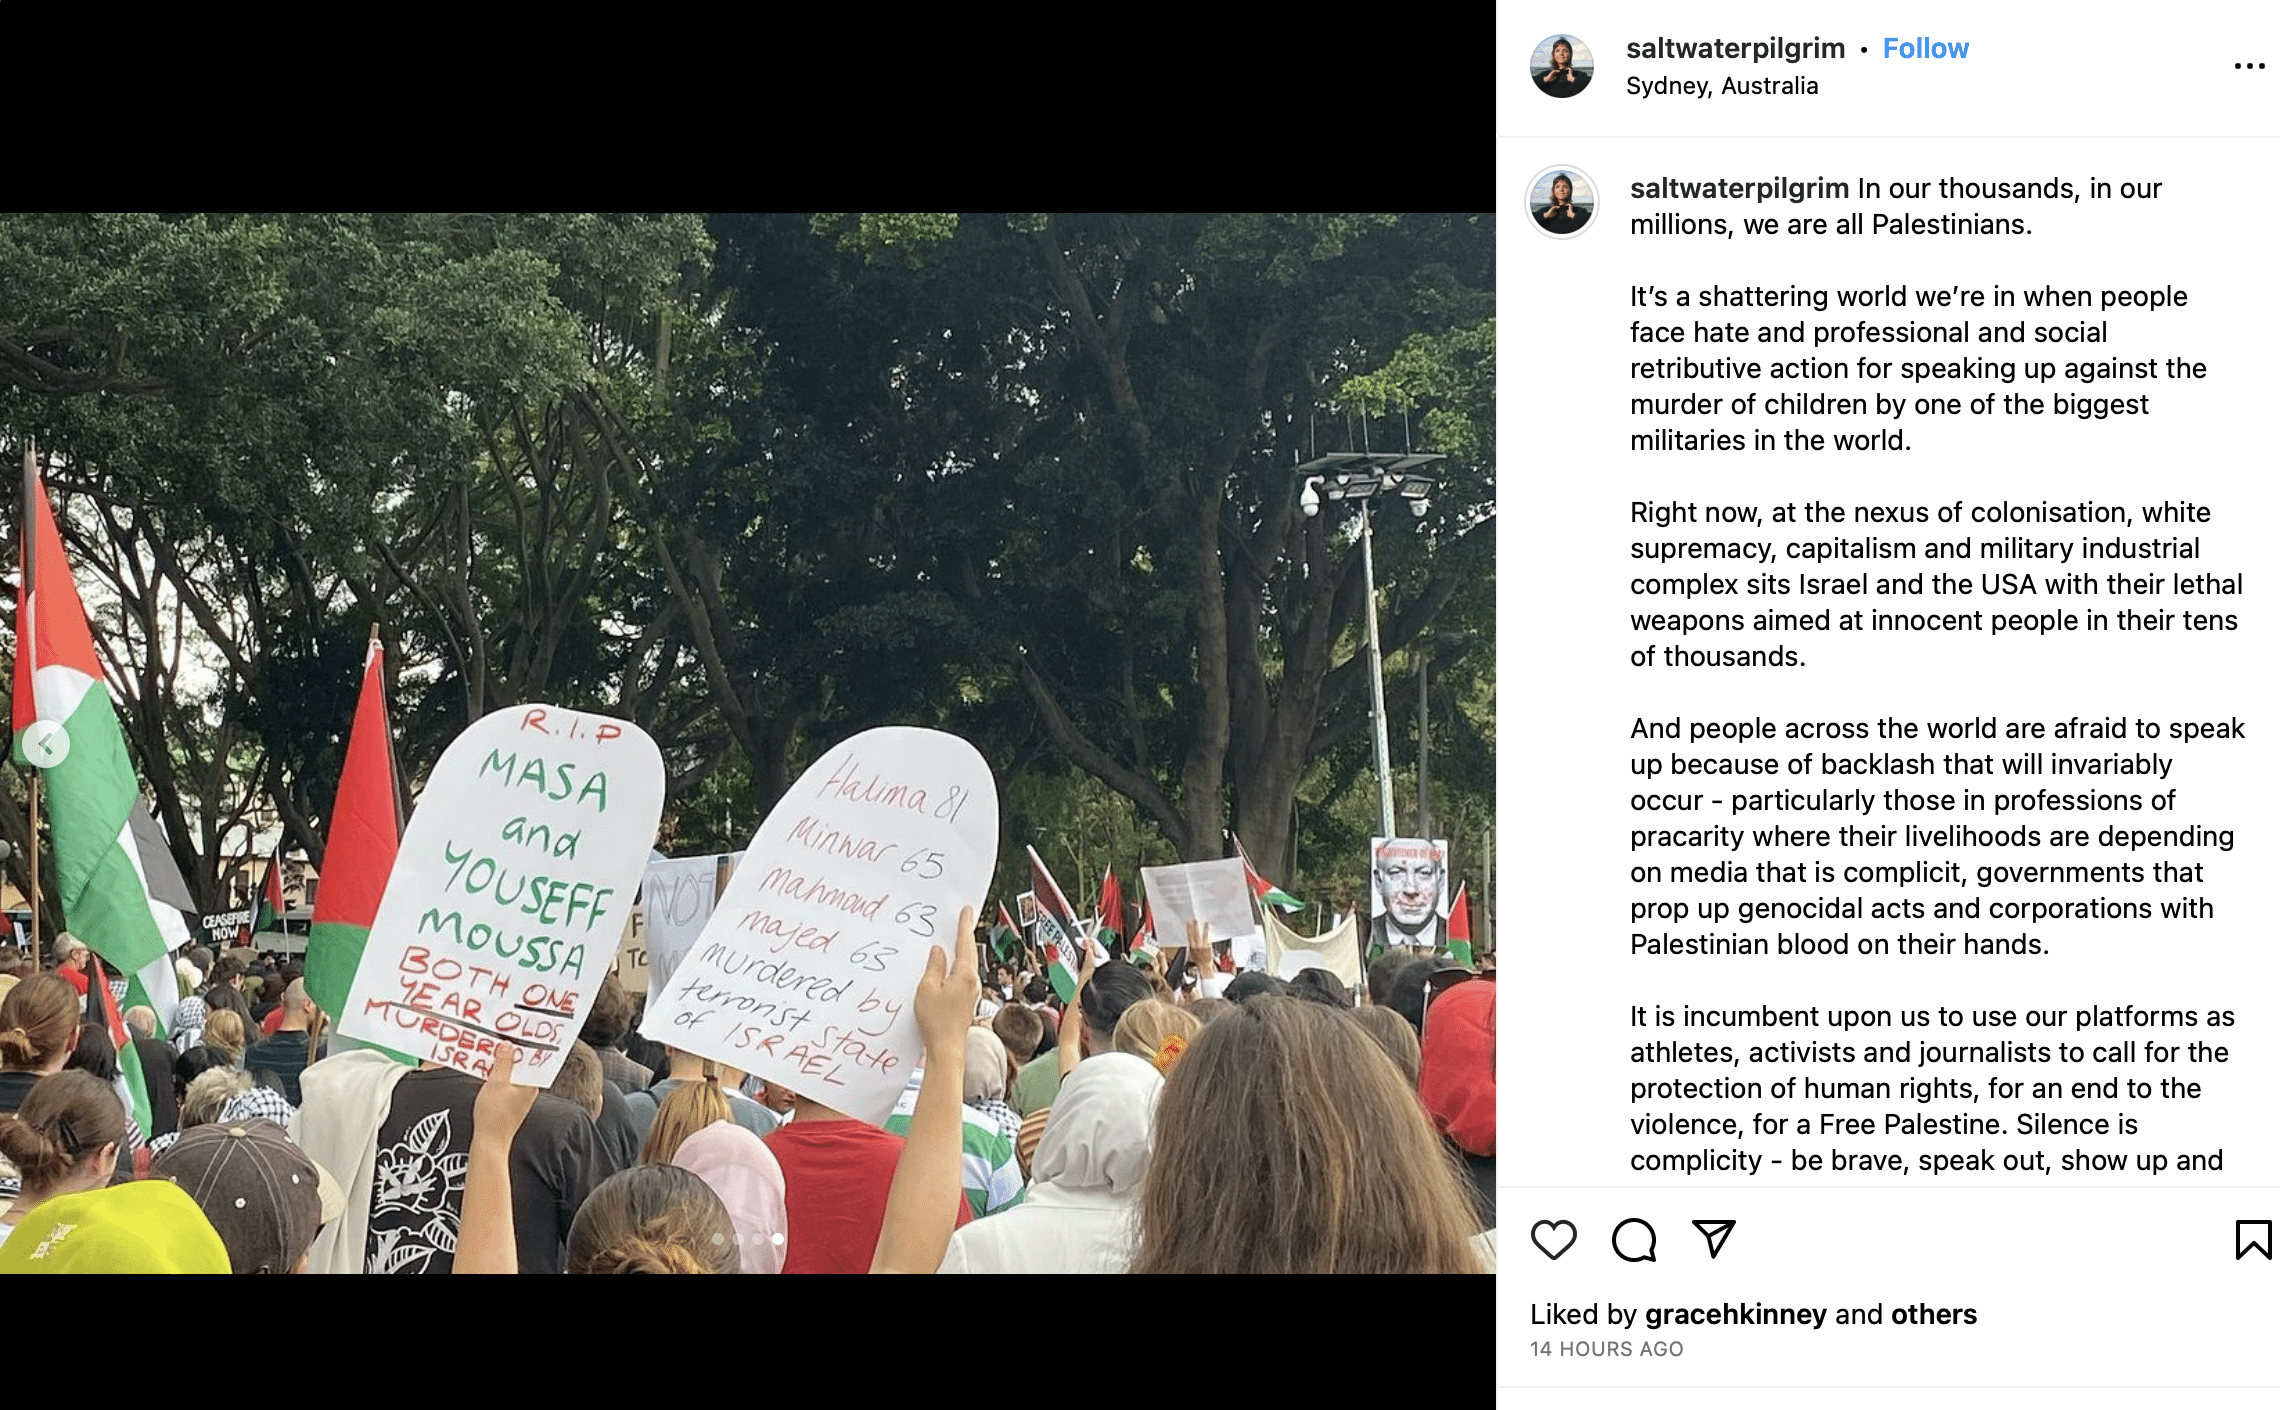 Lucy Small Instagram post about Palestine v Israel conflict